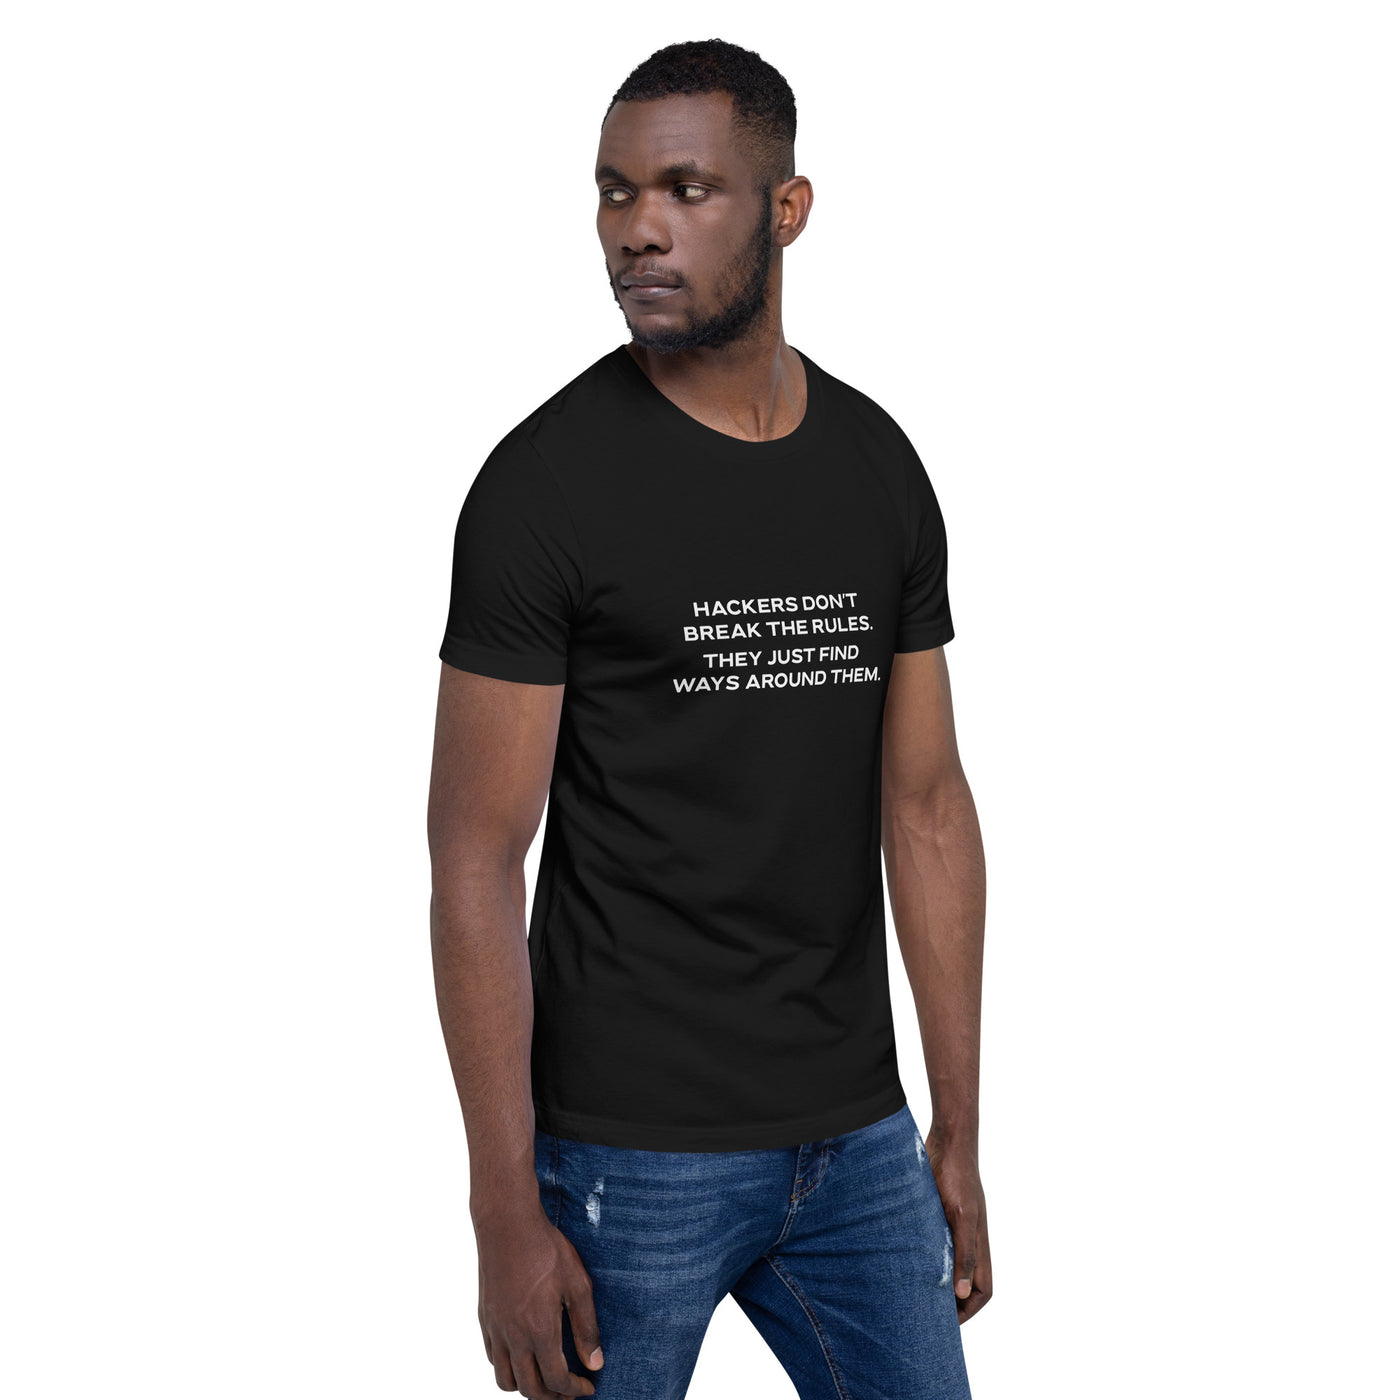 Hackers don't break the rules, they just find ways around them V2 - Unisex t-shirt